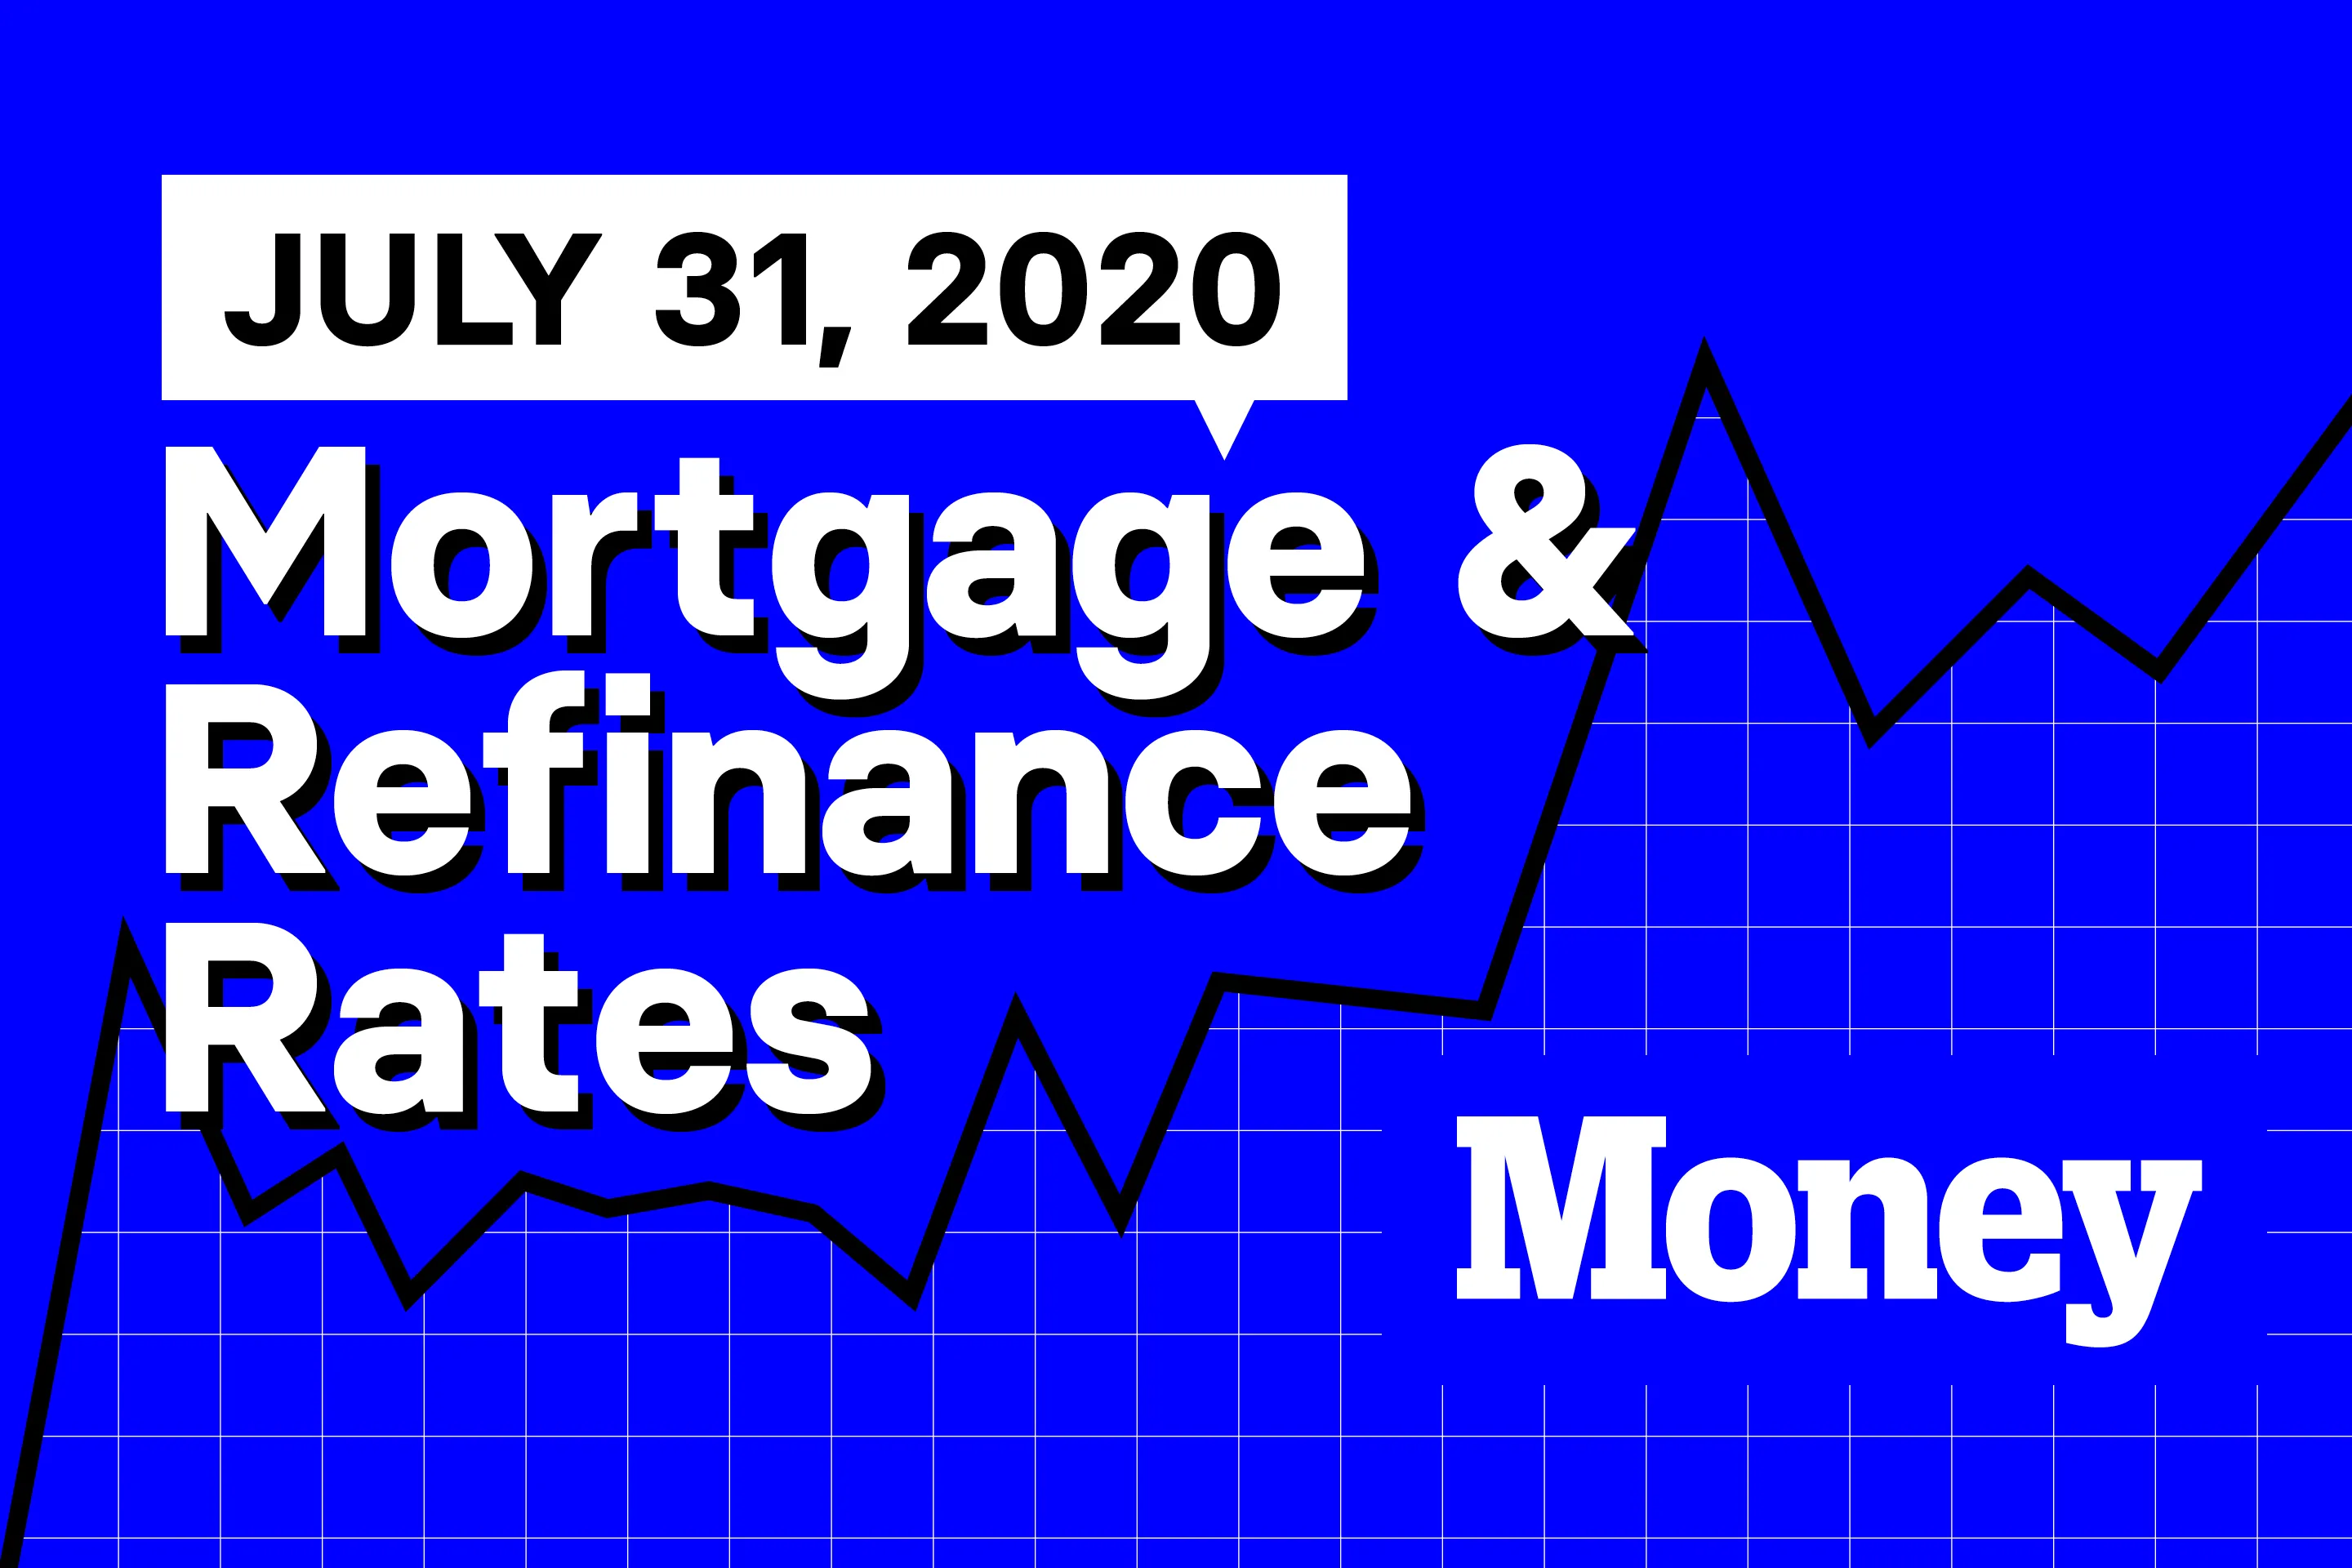 Here Are Today's Best Mortgage & Refinance Rates for July 31, 2020